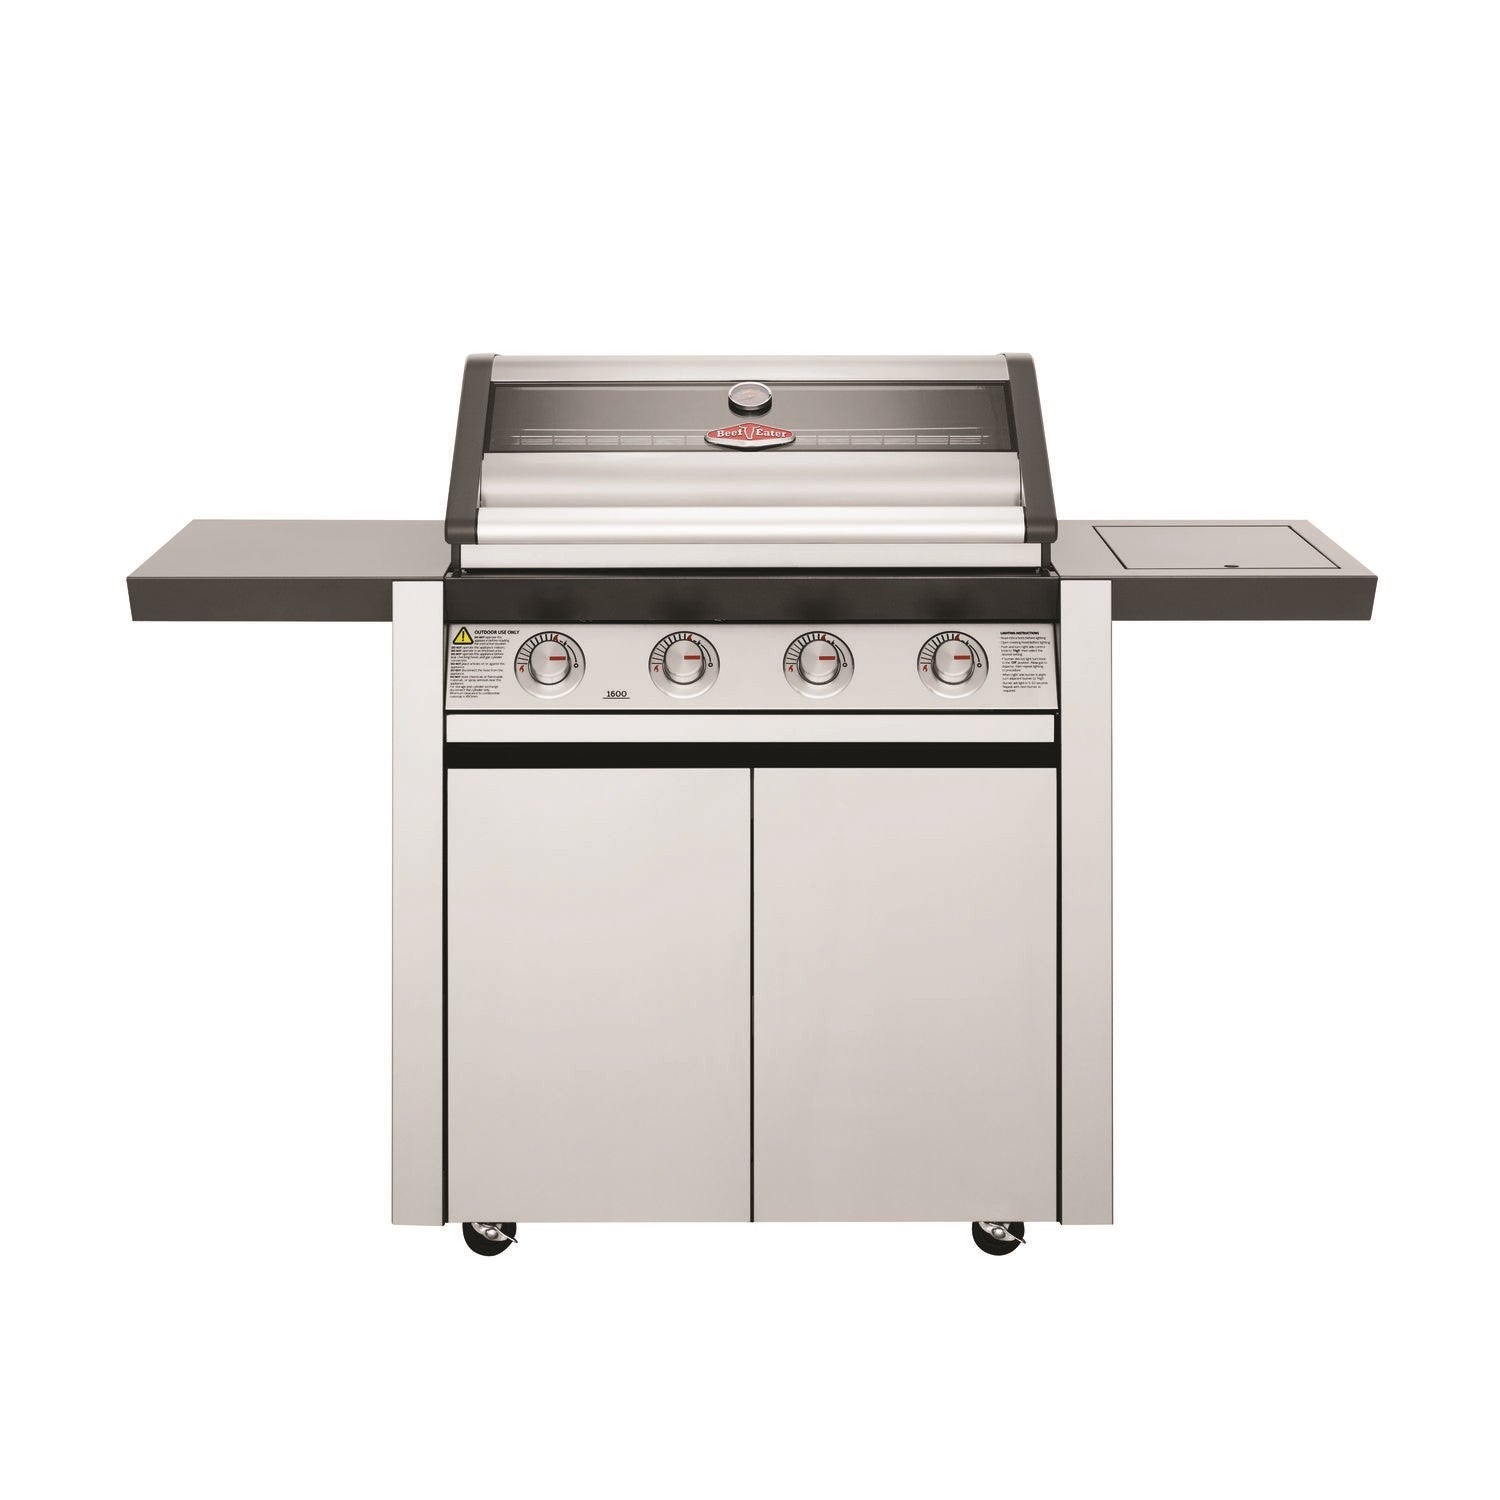 Beefeater 1600S Series - 4 Burner Gas Barbecue Grill and Trolley